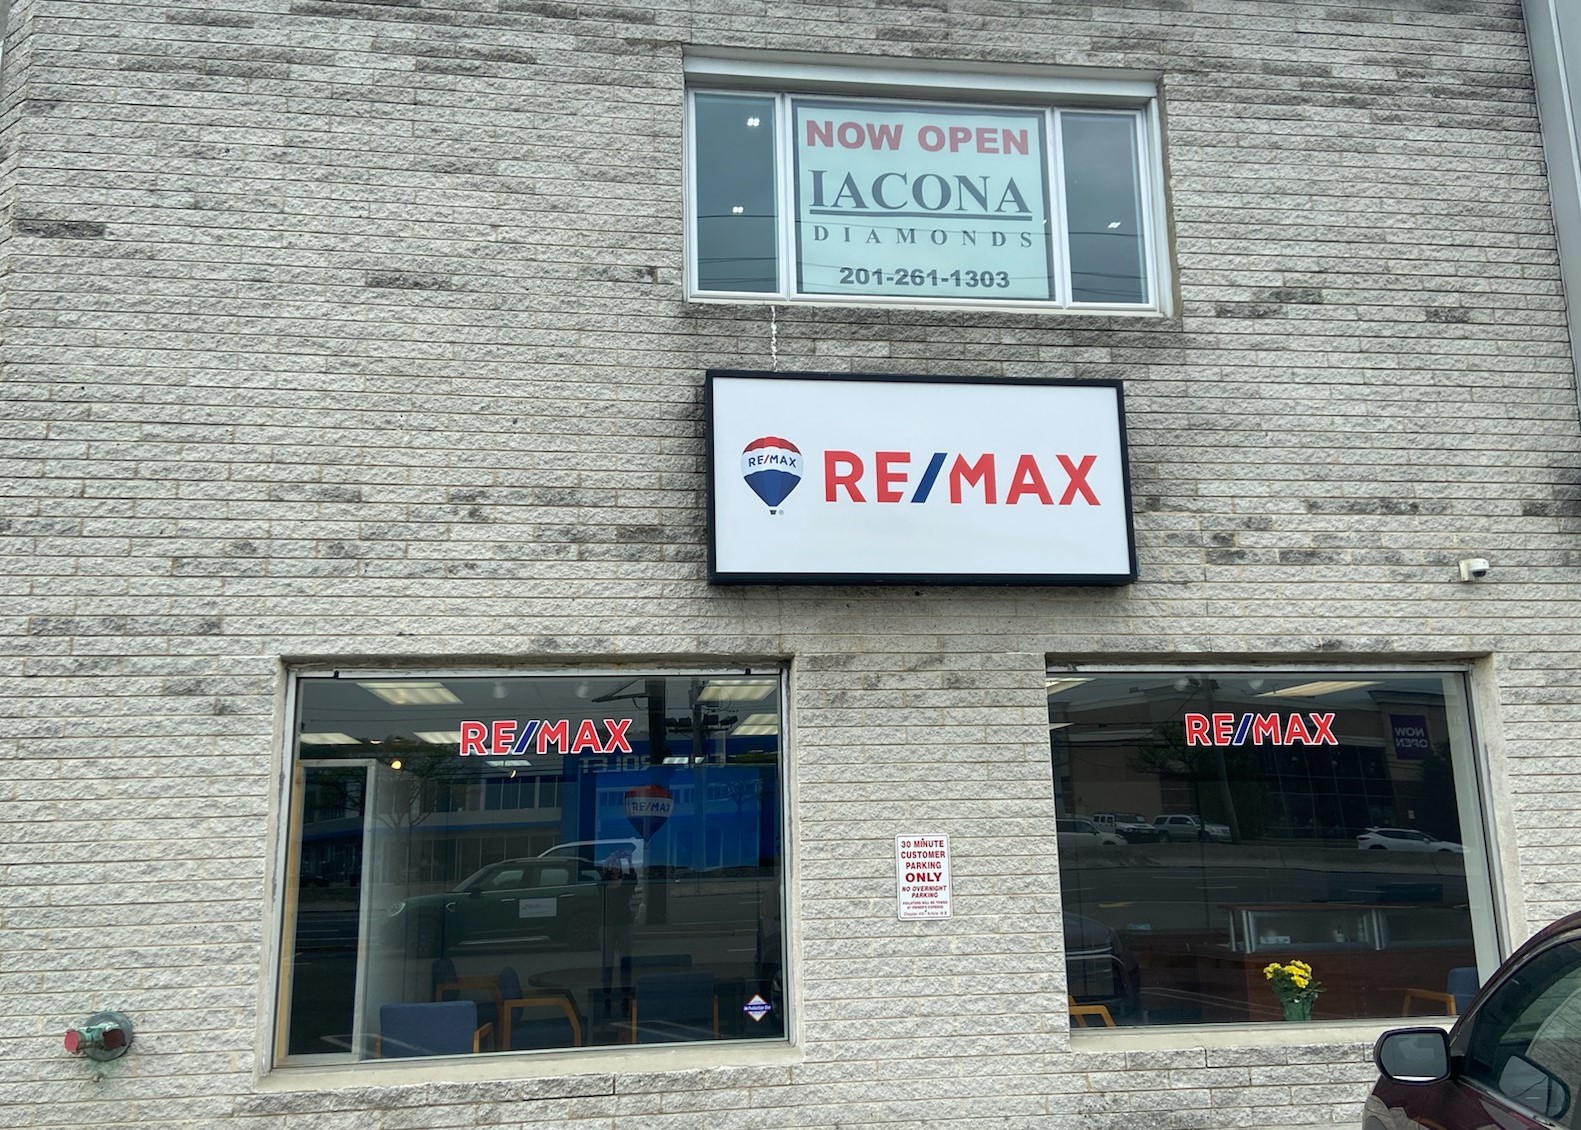 RE/MAX Property Center